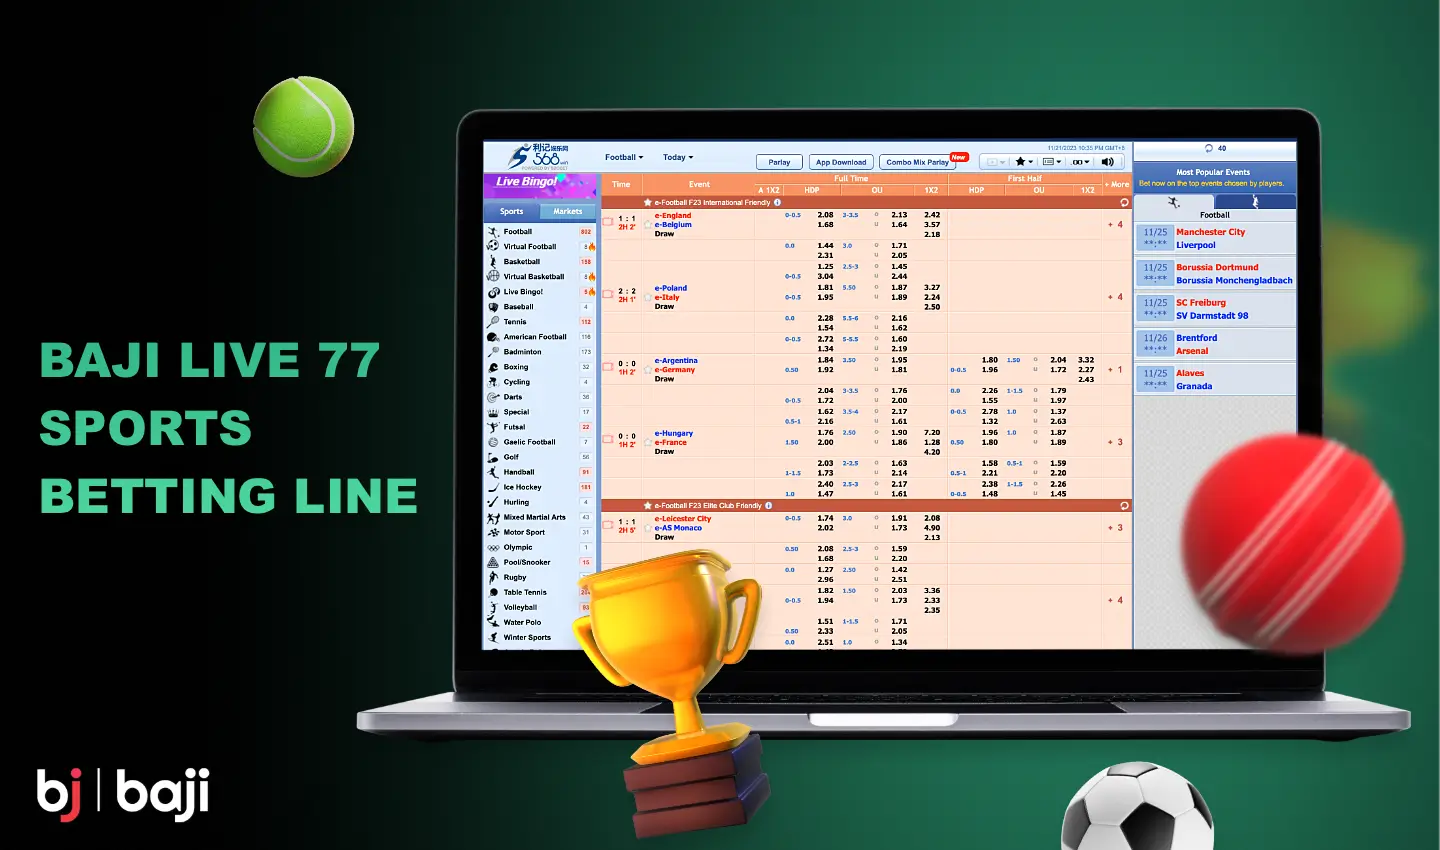 At Baji Live 777, users have access to betting on dozens of sports